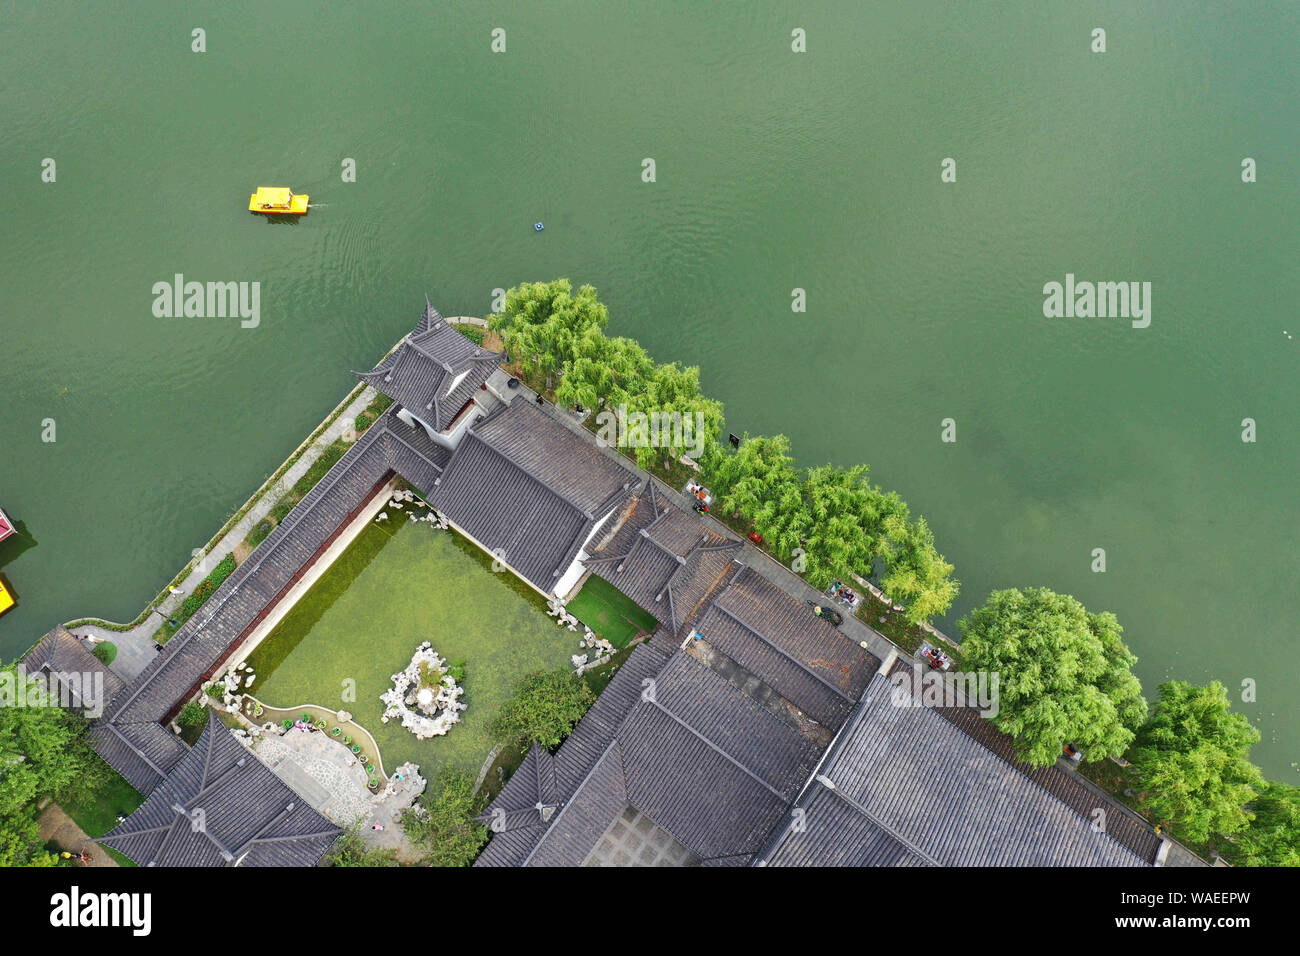 Jiangsu, Jiangsu, China. 20th Aug, 2019. Nanjing, CHINA-Aerial photo of Mochou lake park in Nanjing, east China's Jiangsu province, Aug. 18, 2019.Mochou lake is a famous classical garden in the south of the Yangtze river with a long history of 1500 years and rich cultural resources.Since ancient times, it has been known as ''the first lake in Jiangnan'', ''the first scenic spot in Jinling'' and ''the first of forty-eight scenic spots in Jinling' Credit: SIPA Asia/ZUMA Wire/Alamy Live News Stock Photo